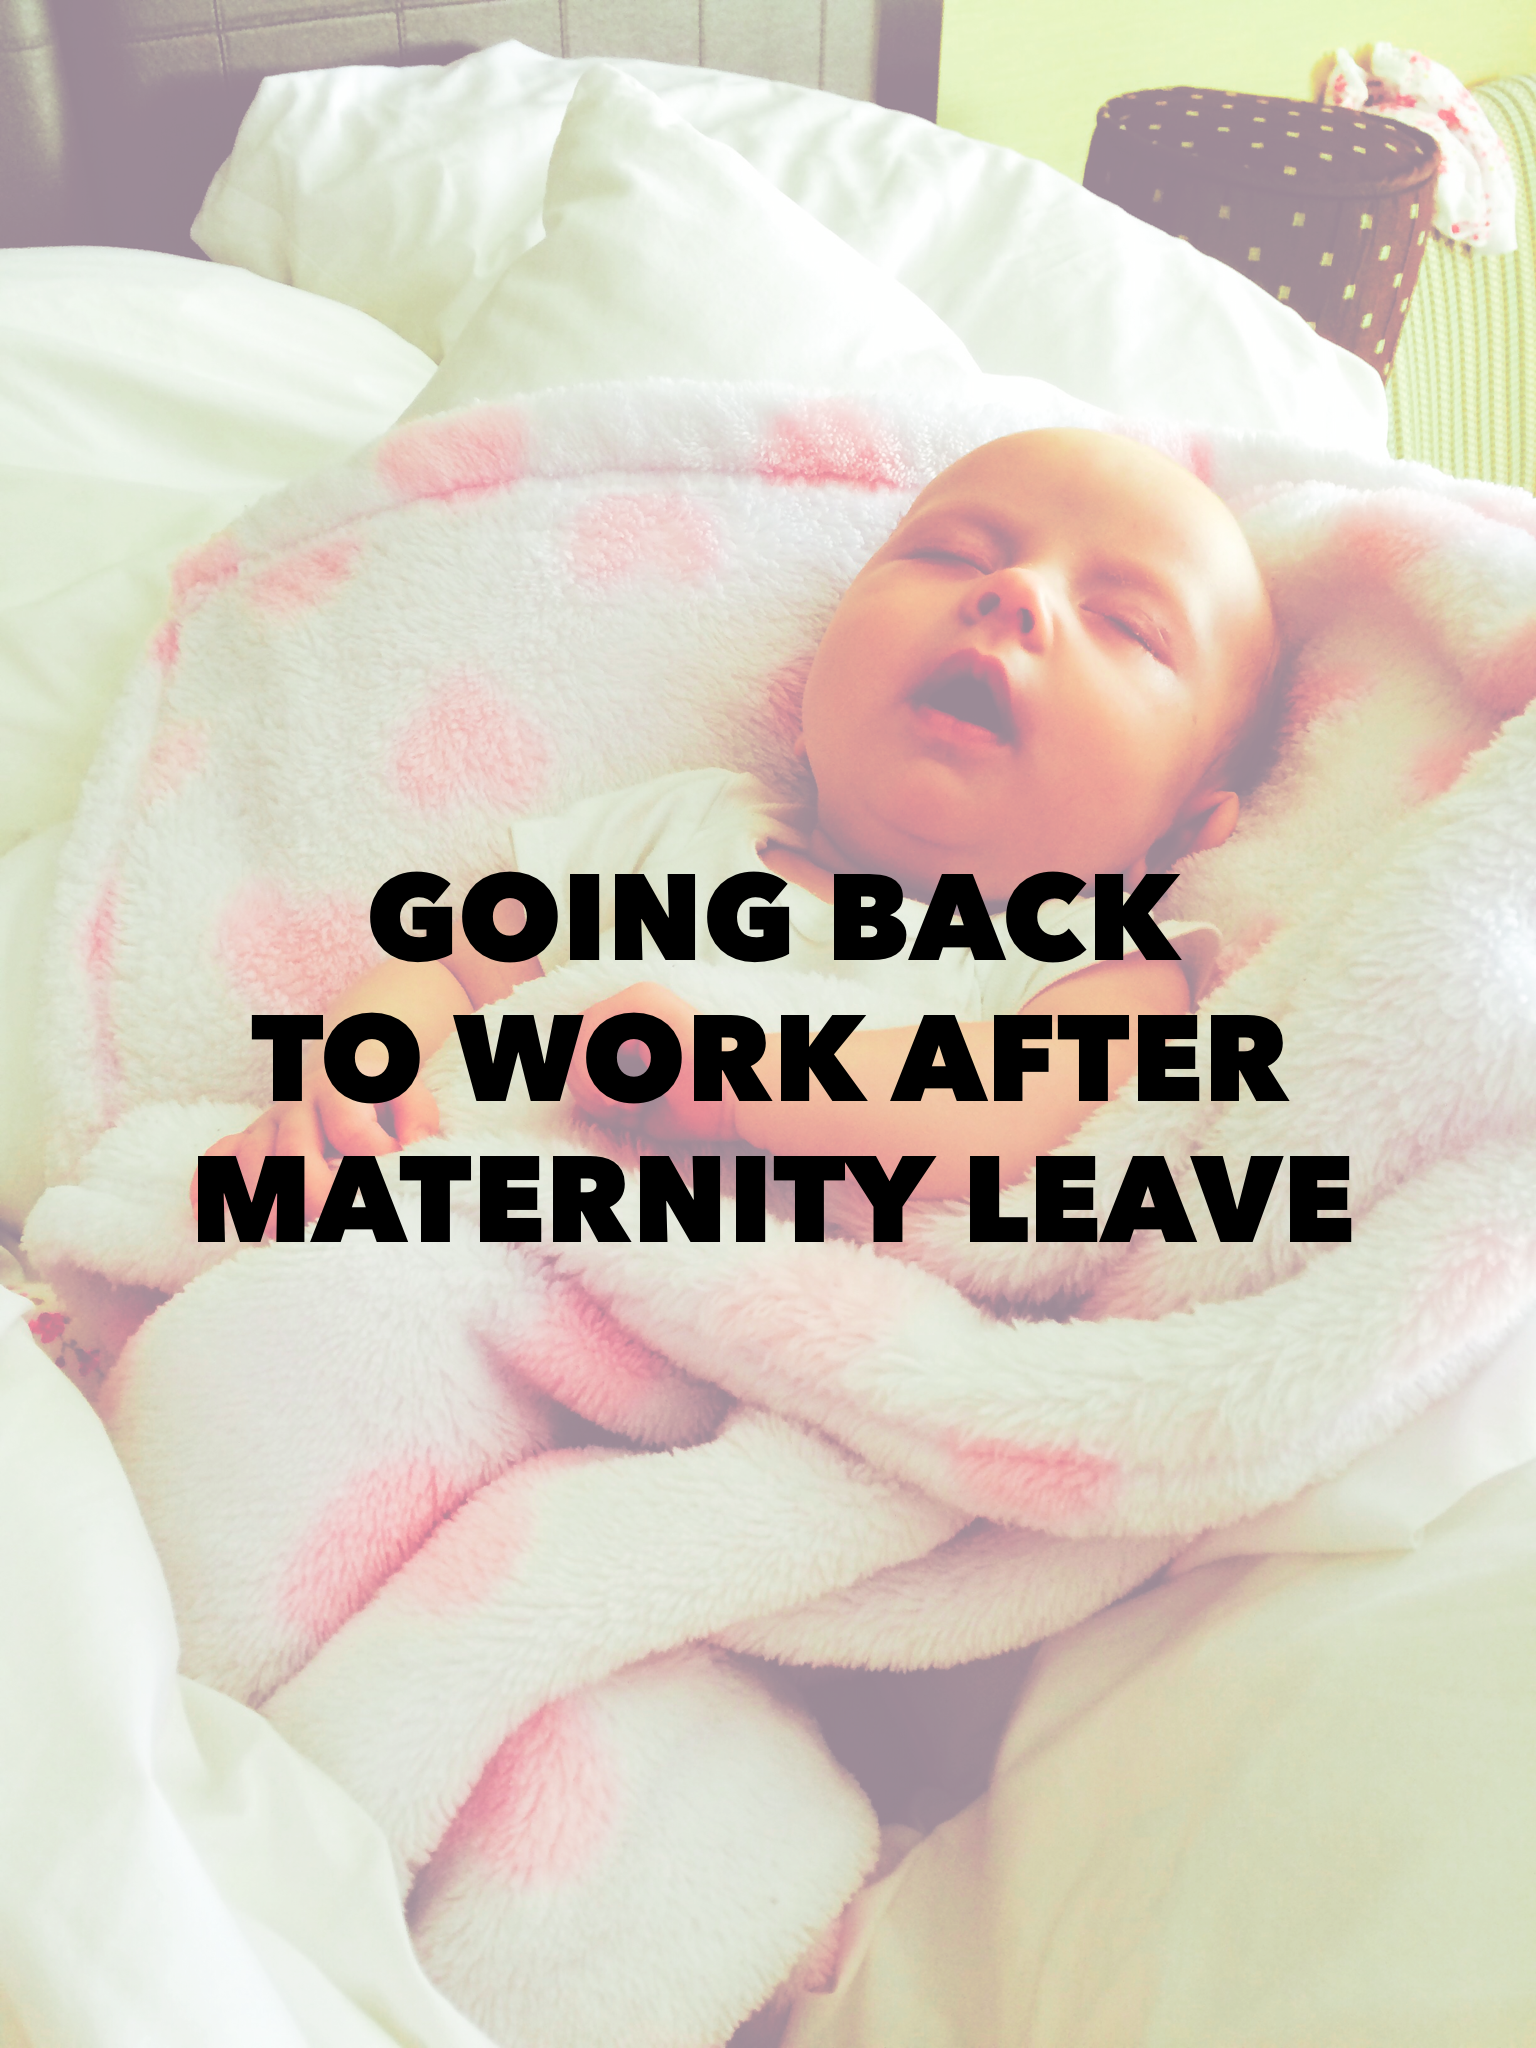 Four Tips on Going Back to Work After Maternity Leave by EleanorPie Spin Sucks